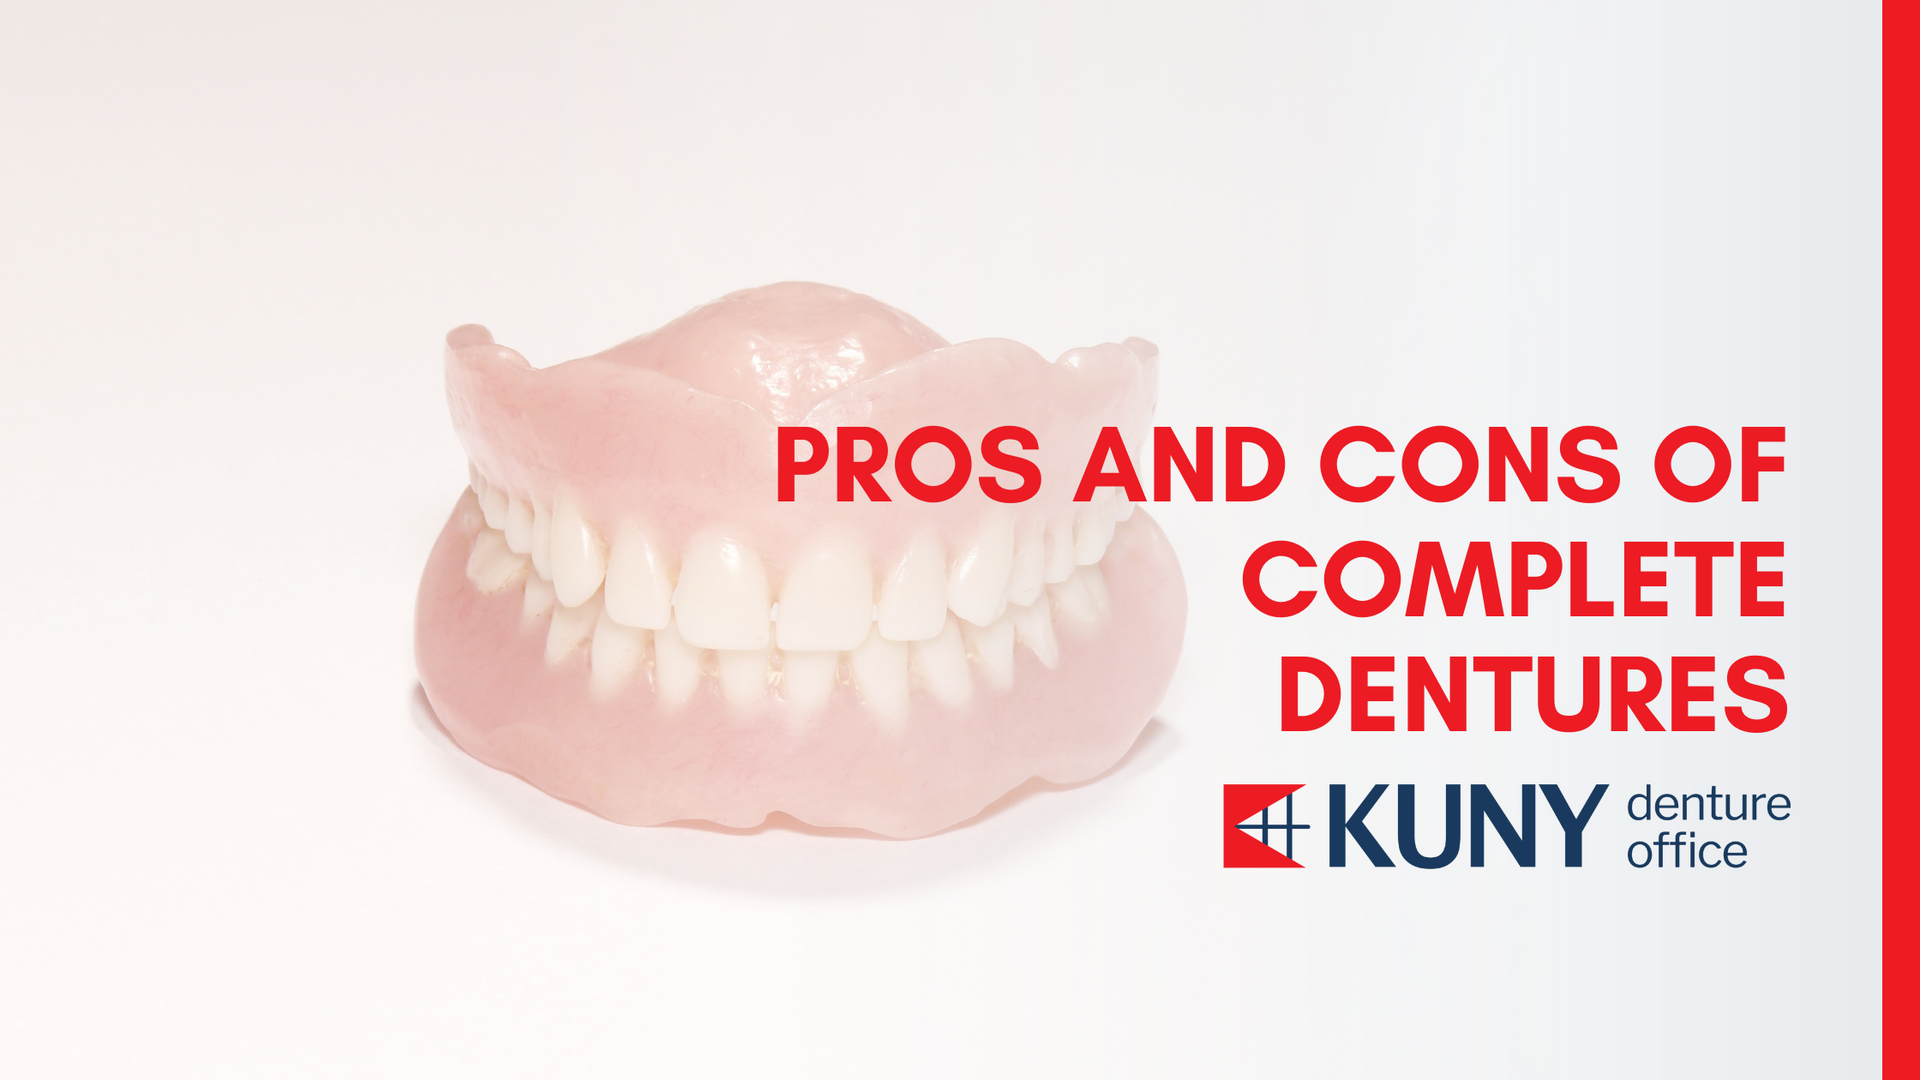 a picture of a denture with the words pros and cons of complete dentures on it .